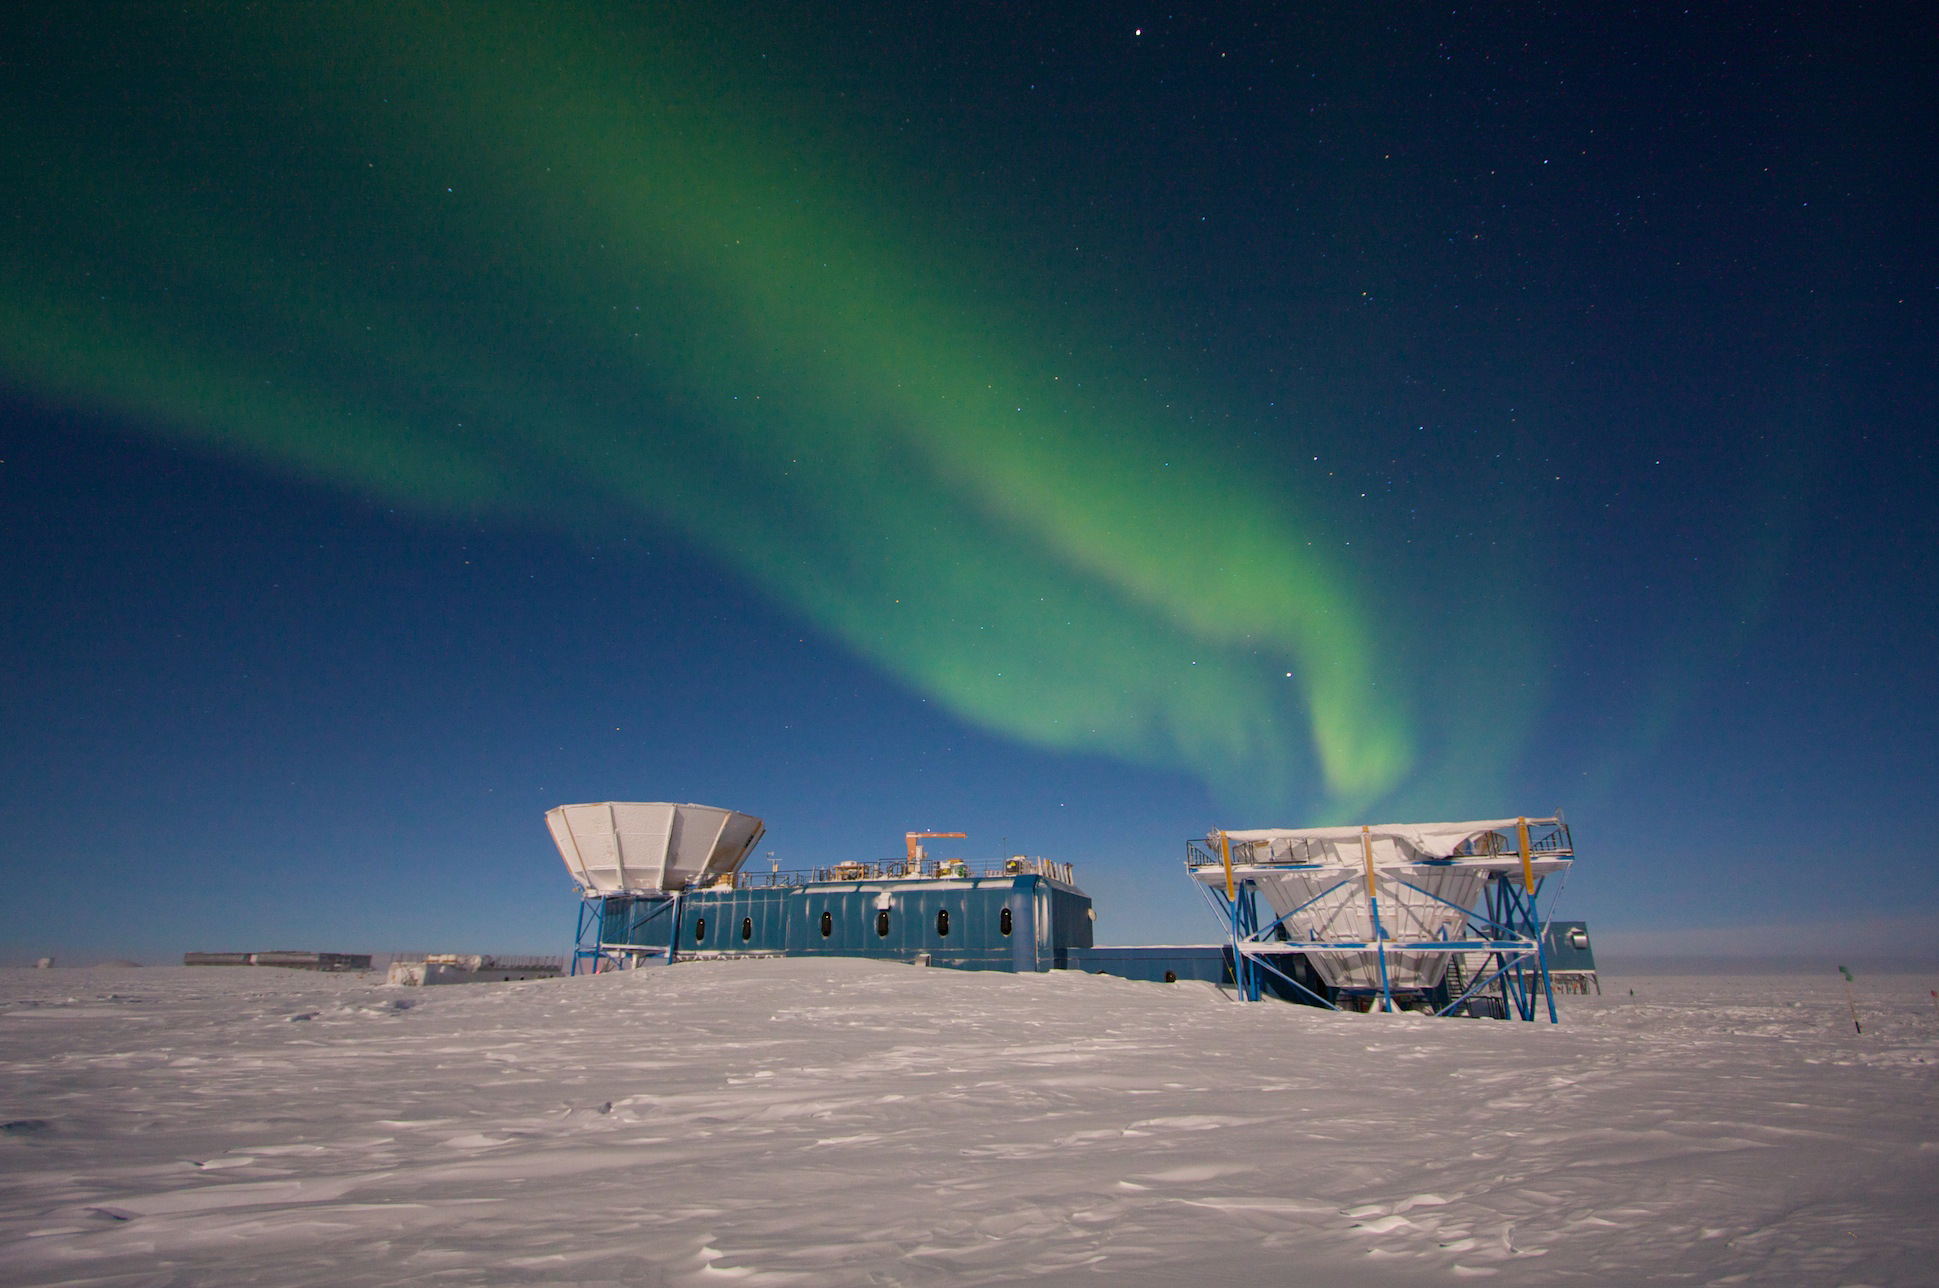 Auroras appear in the sky above a science building at the U.S. research station at the South Pole. 